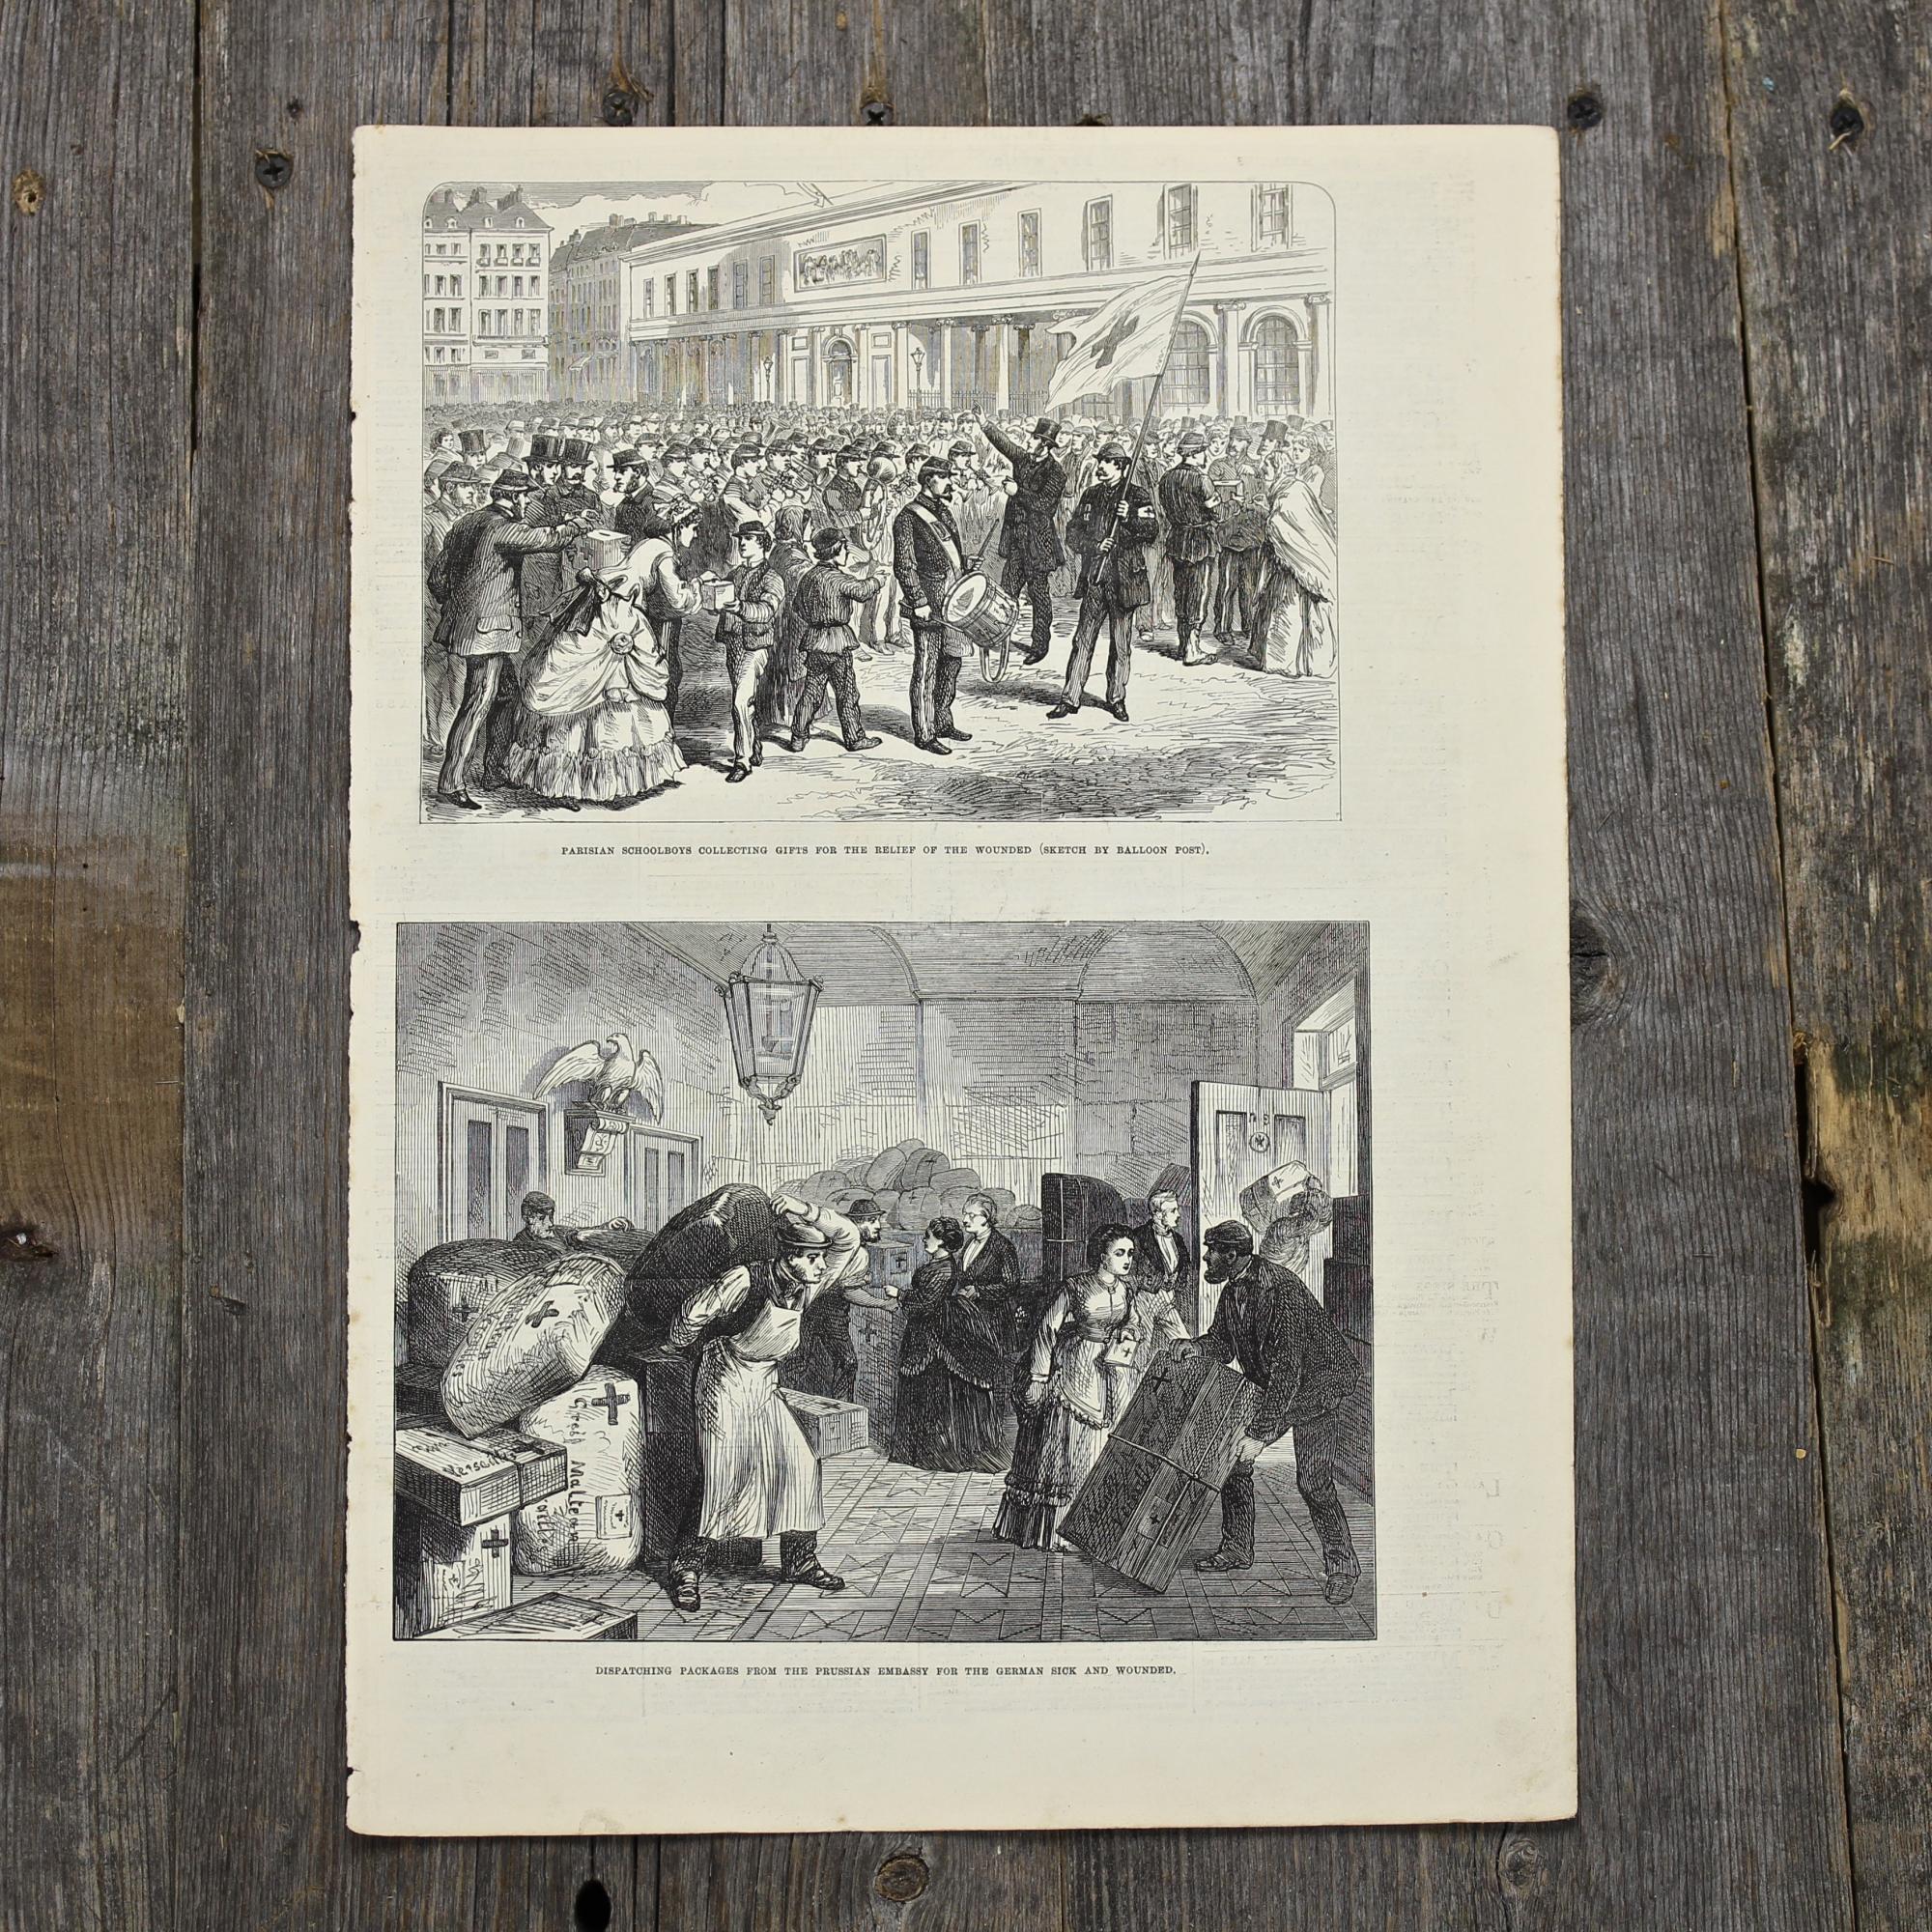 Антикварная иллюстрация The Illustrated London News Parisian schoolboys collecting gifts for the relief of the wounded